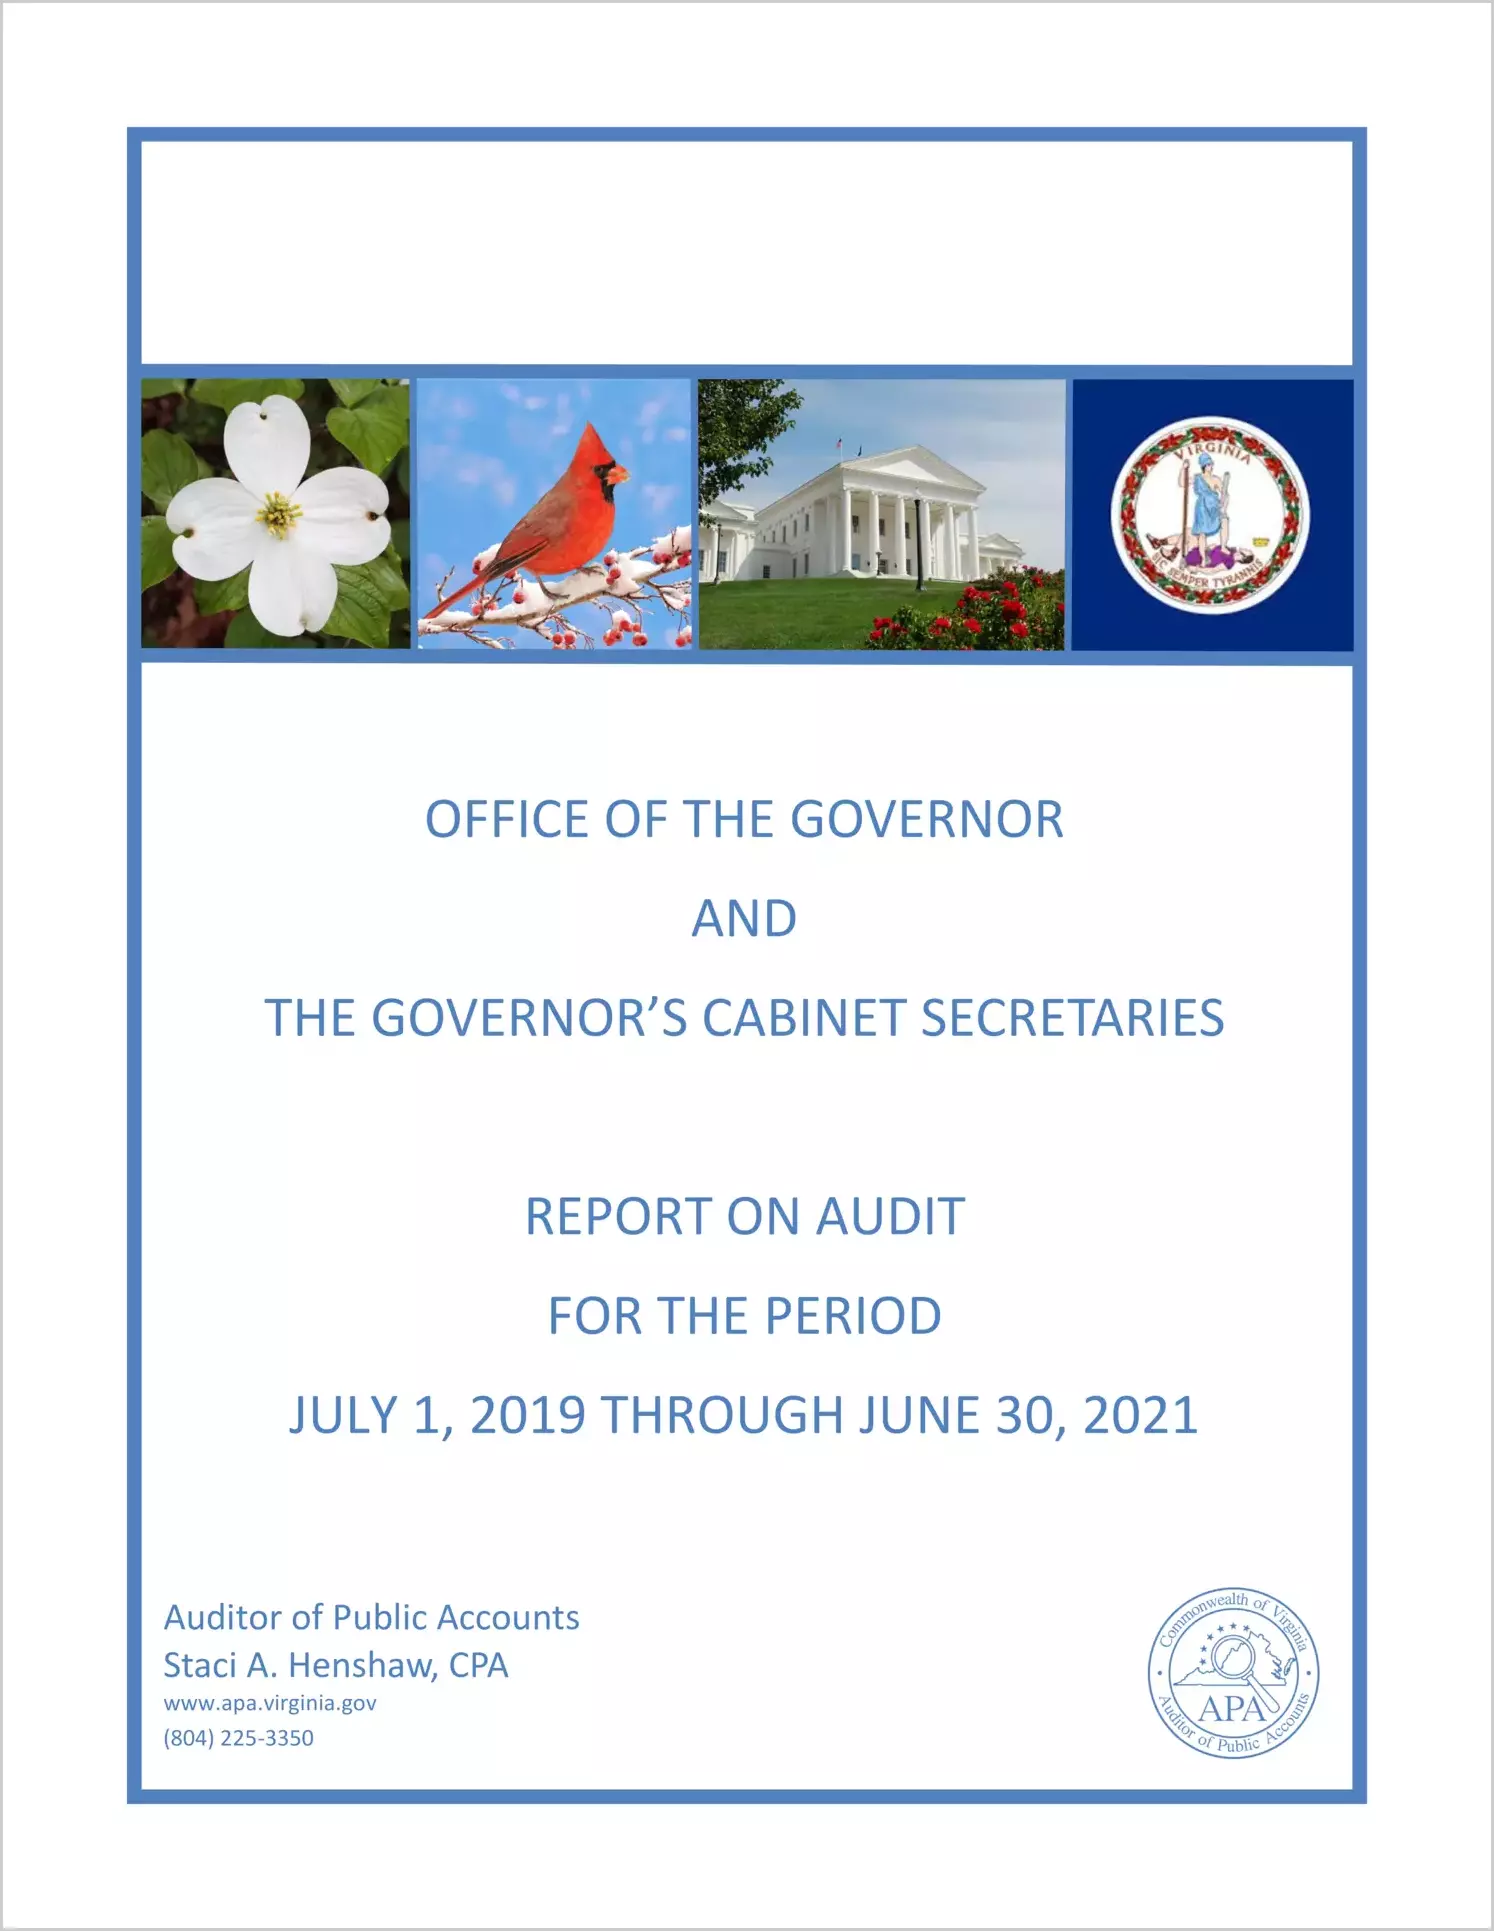 Office of the Governor and the Governor's Cabinet Secretaries for the period June 1, 2019 through June 30, 2021